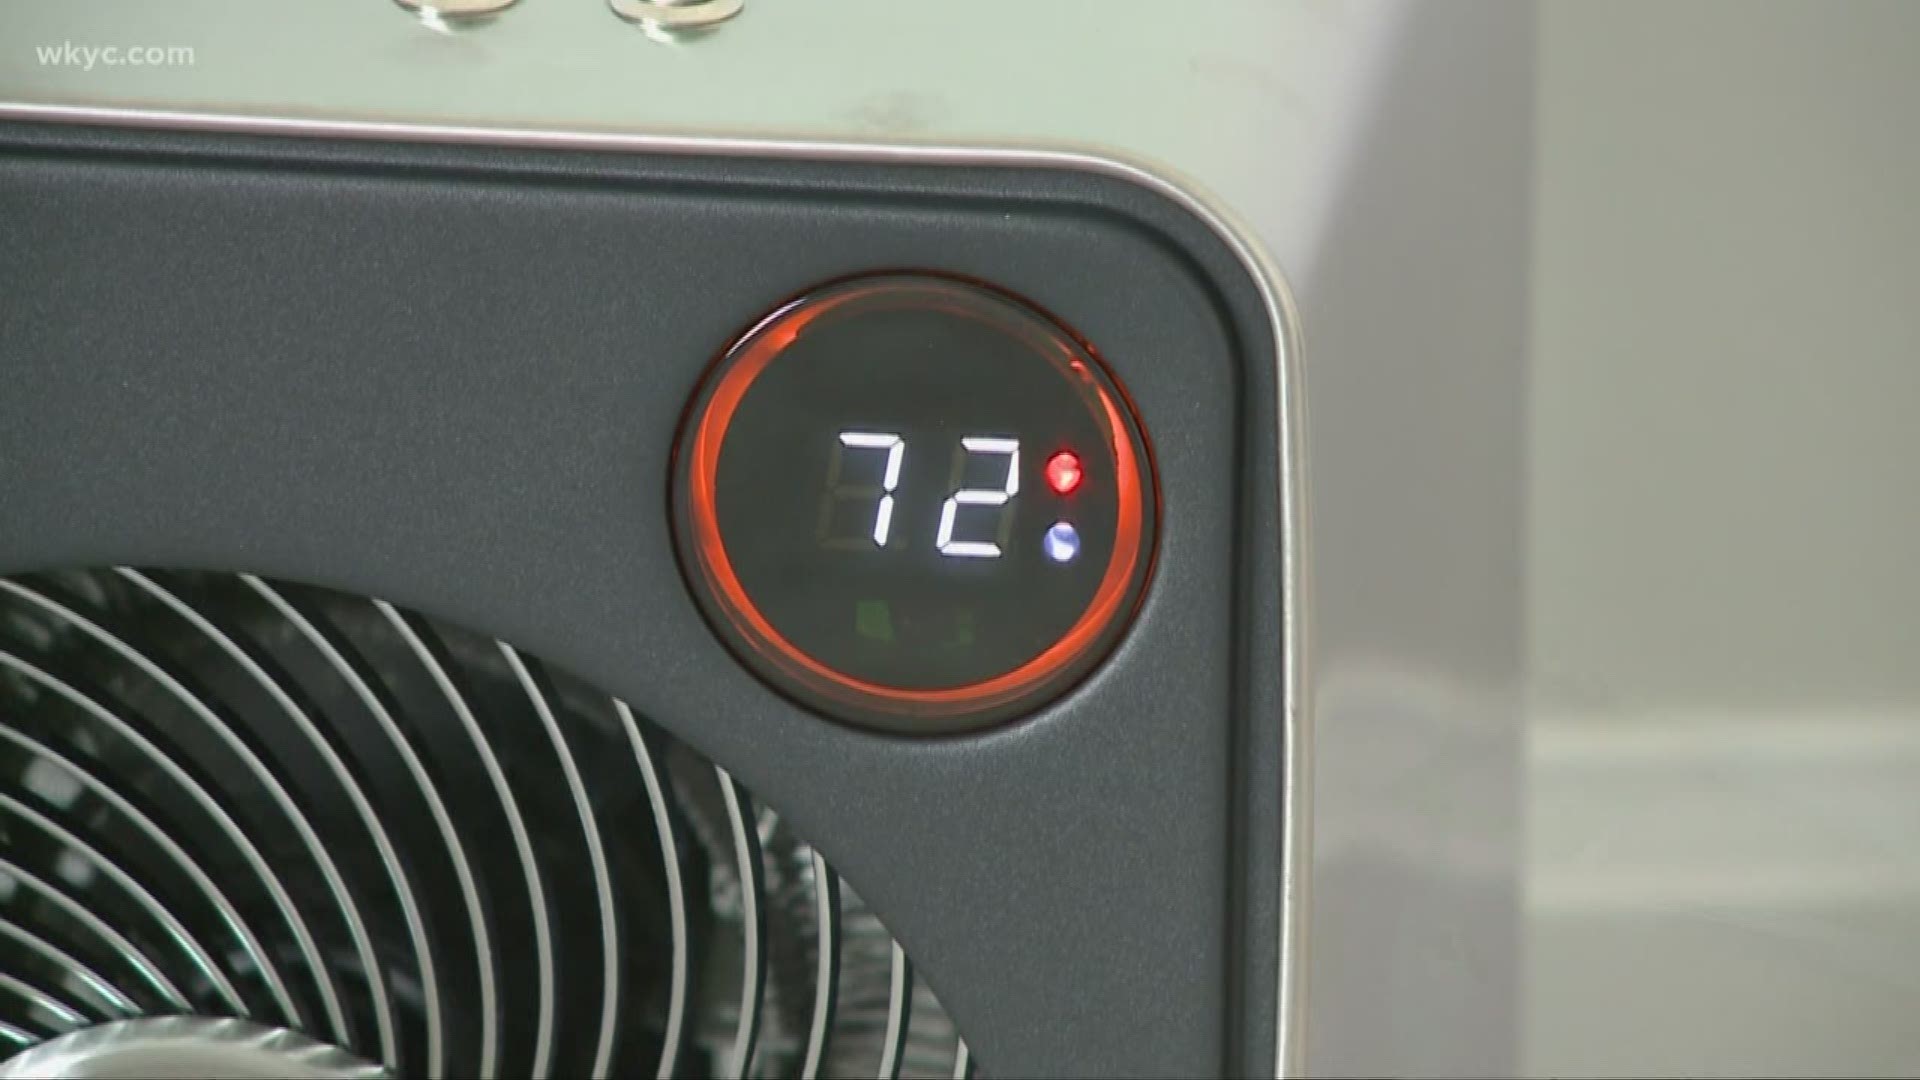 If you buy a space heater to save money, you might get a surprise when you receive your energy bill. We test space heaters to see which warm you up the fastest.